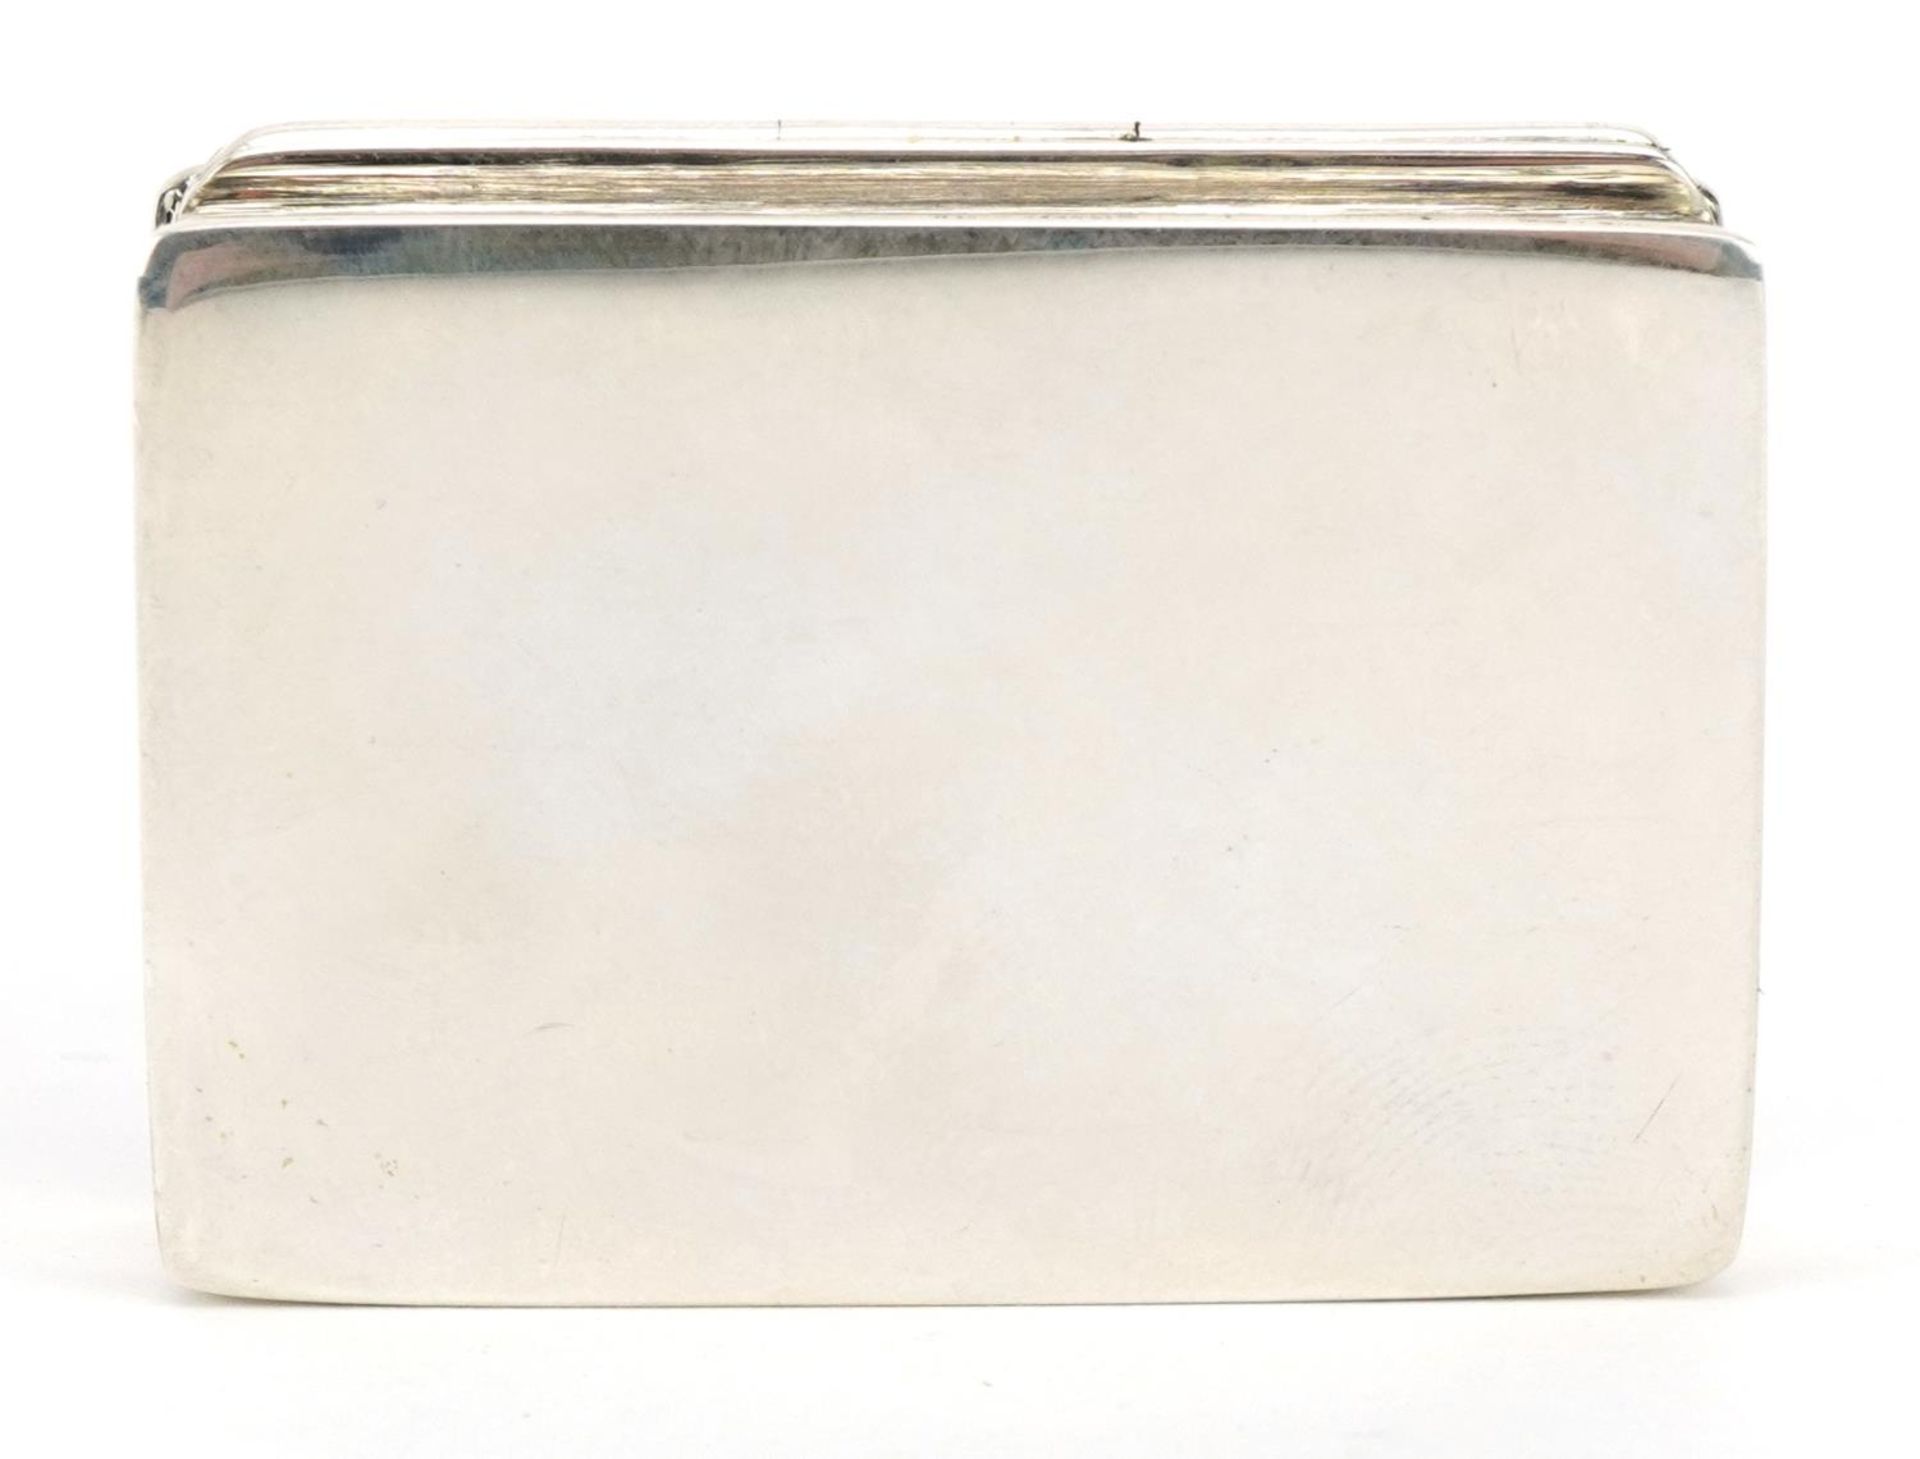 Rectangular silver and enamel pill box, the hinged lid decorated with Formula 1 cars, 5cm wide, 39. - Image 4 of 4